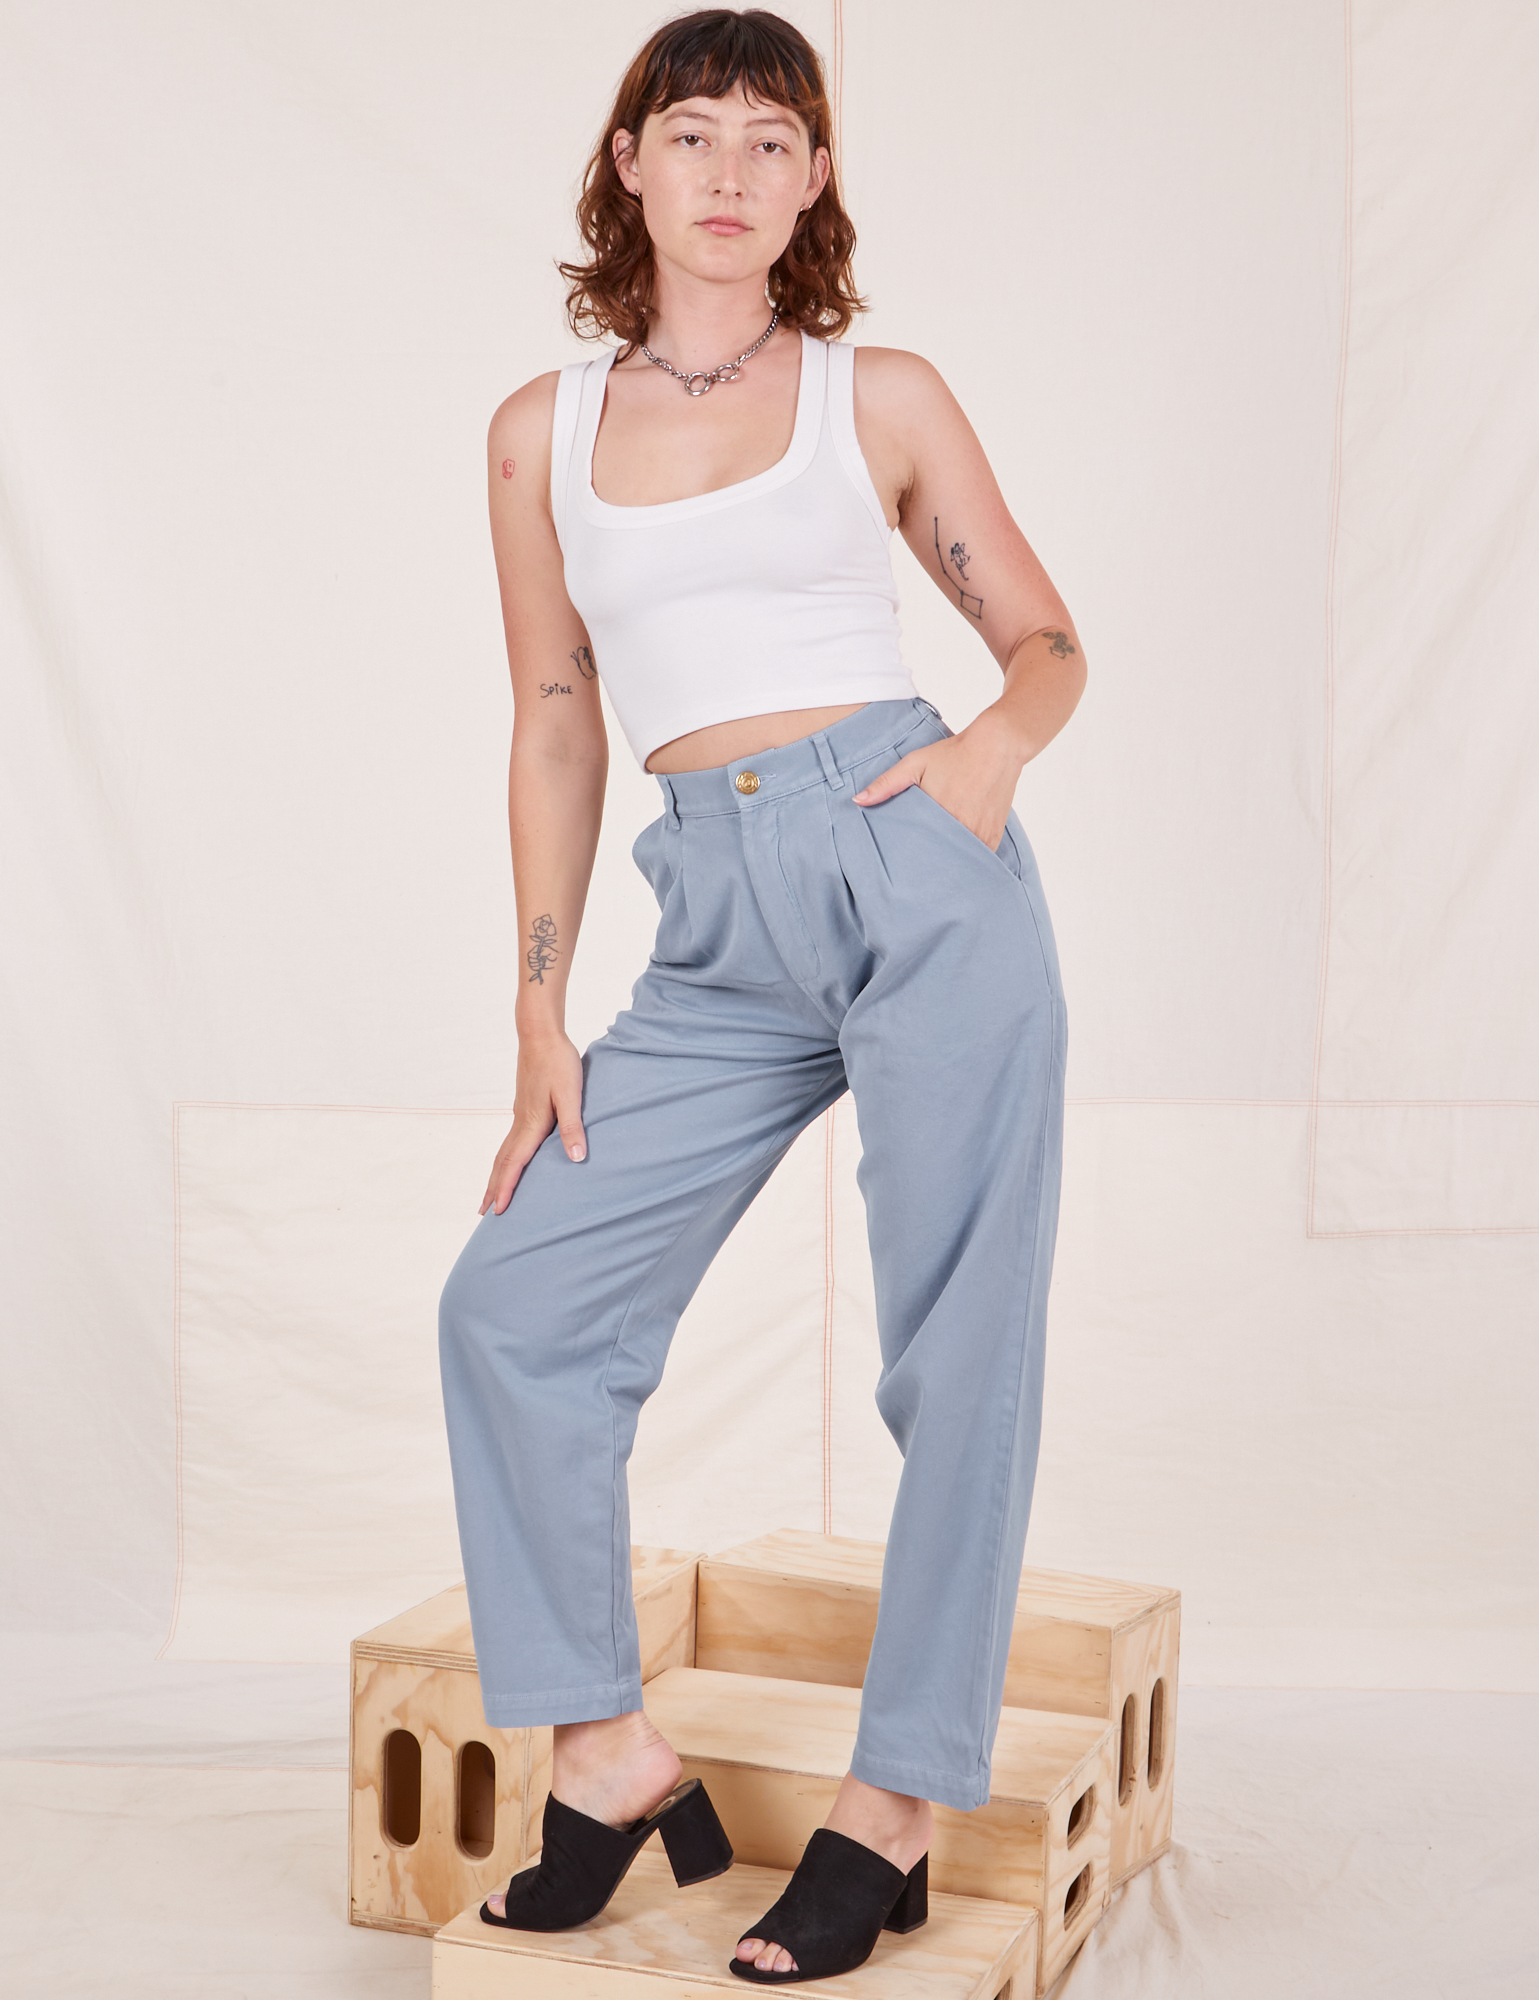 Alex is 5&#39;8&quot; and wearing XXS Organic Trousers in Periwinkle paired with Cropped Tank Top in vintage tee off-white